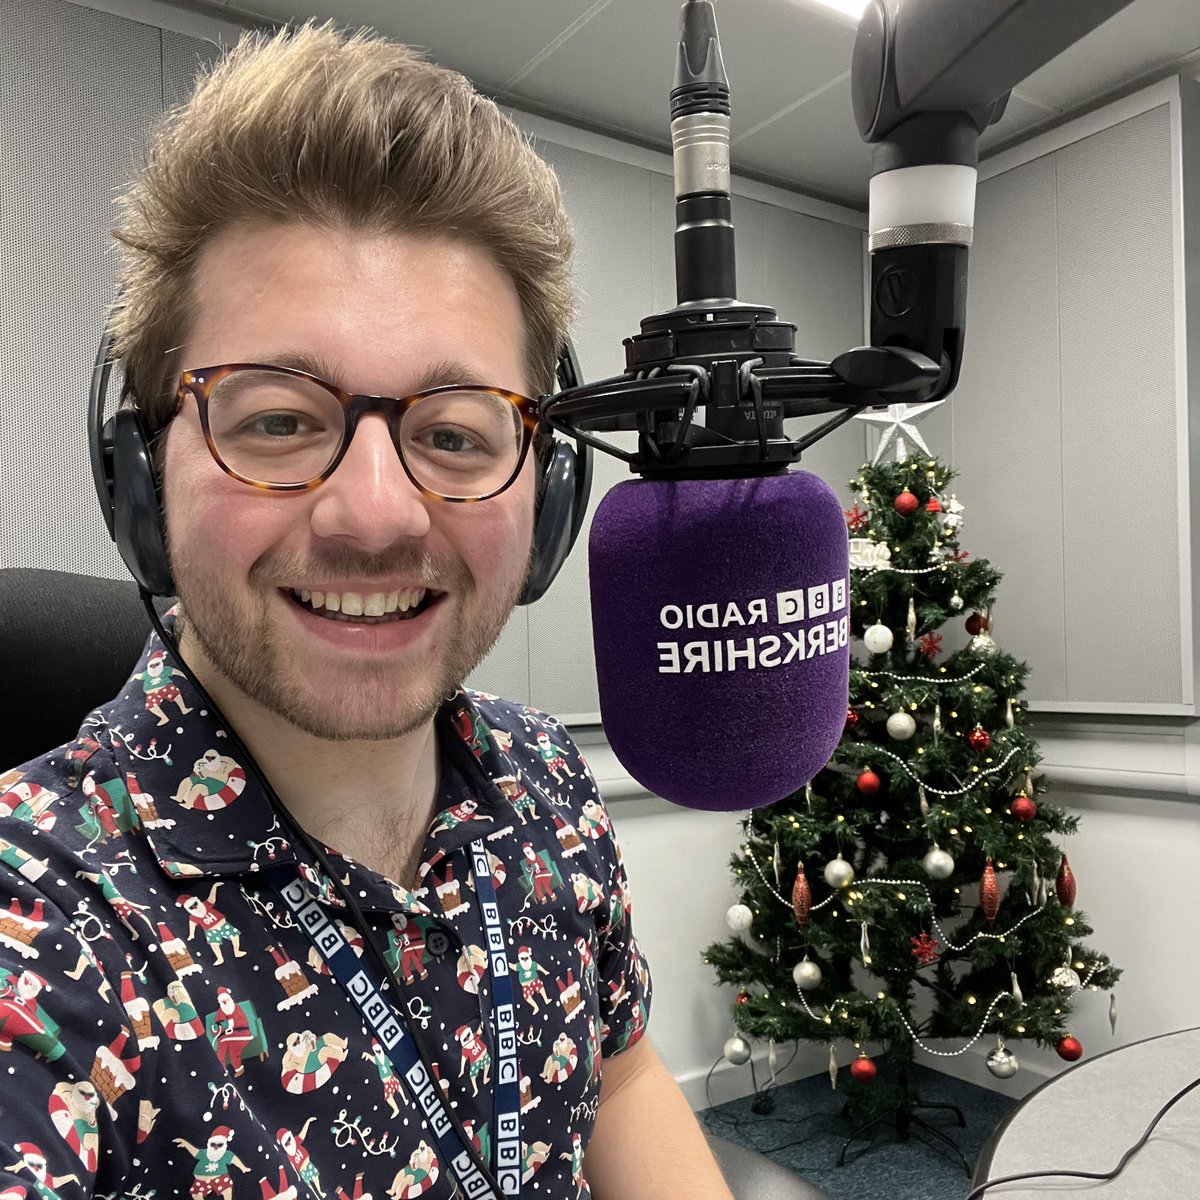 merry christmas! 🎄 see ya 10-1 @BBCBerkshire for some great xmas tunes & plenty of fun while you sort out your dinner - lovely to be back! 🎅🏻